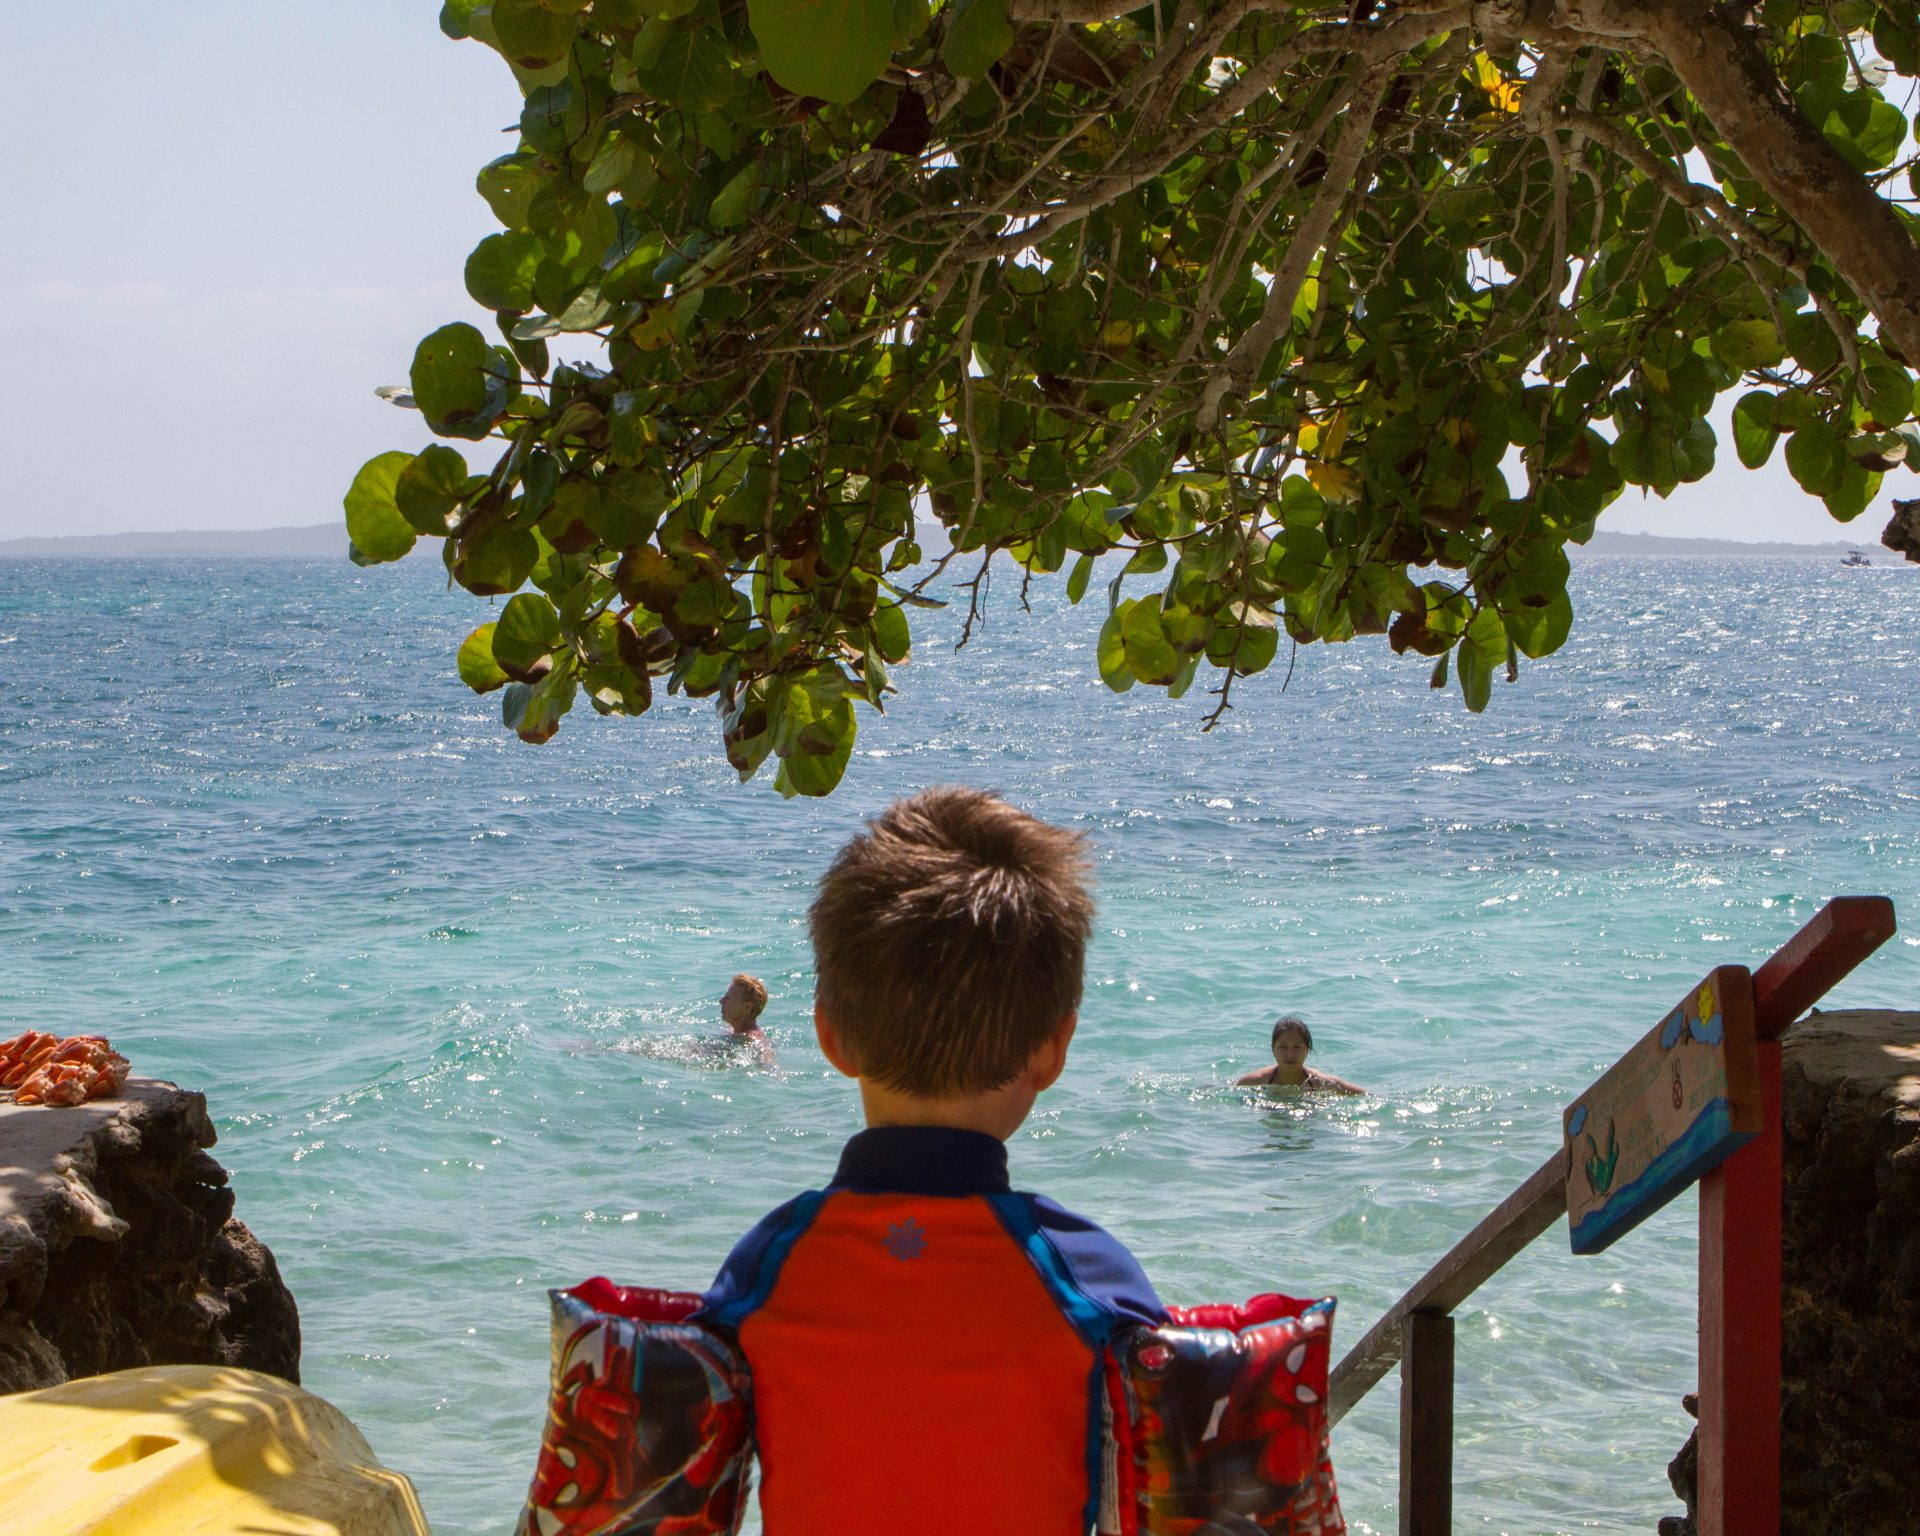 Young boy wearing water wings looking out over a tropical ocean